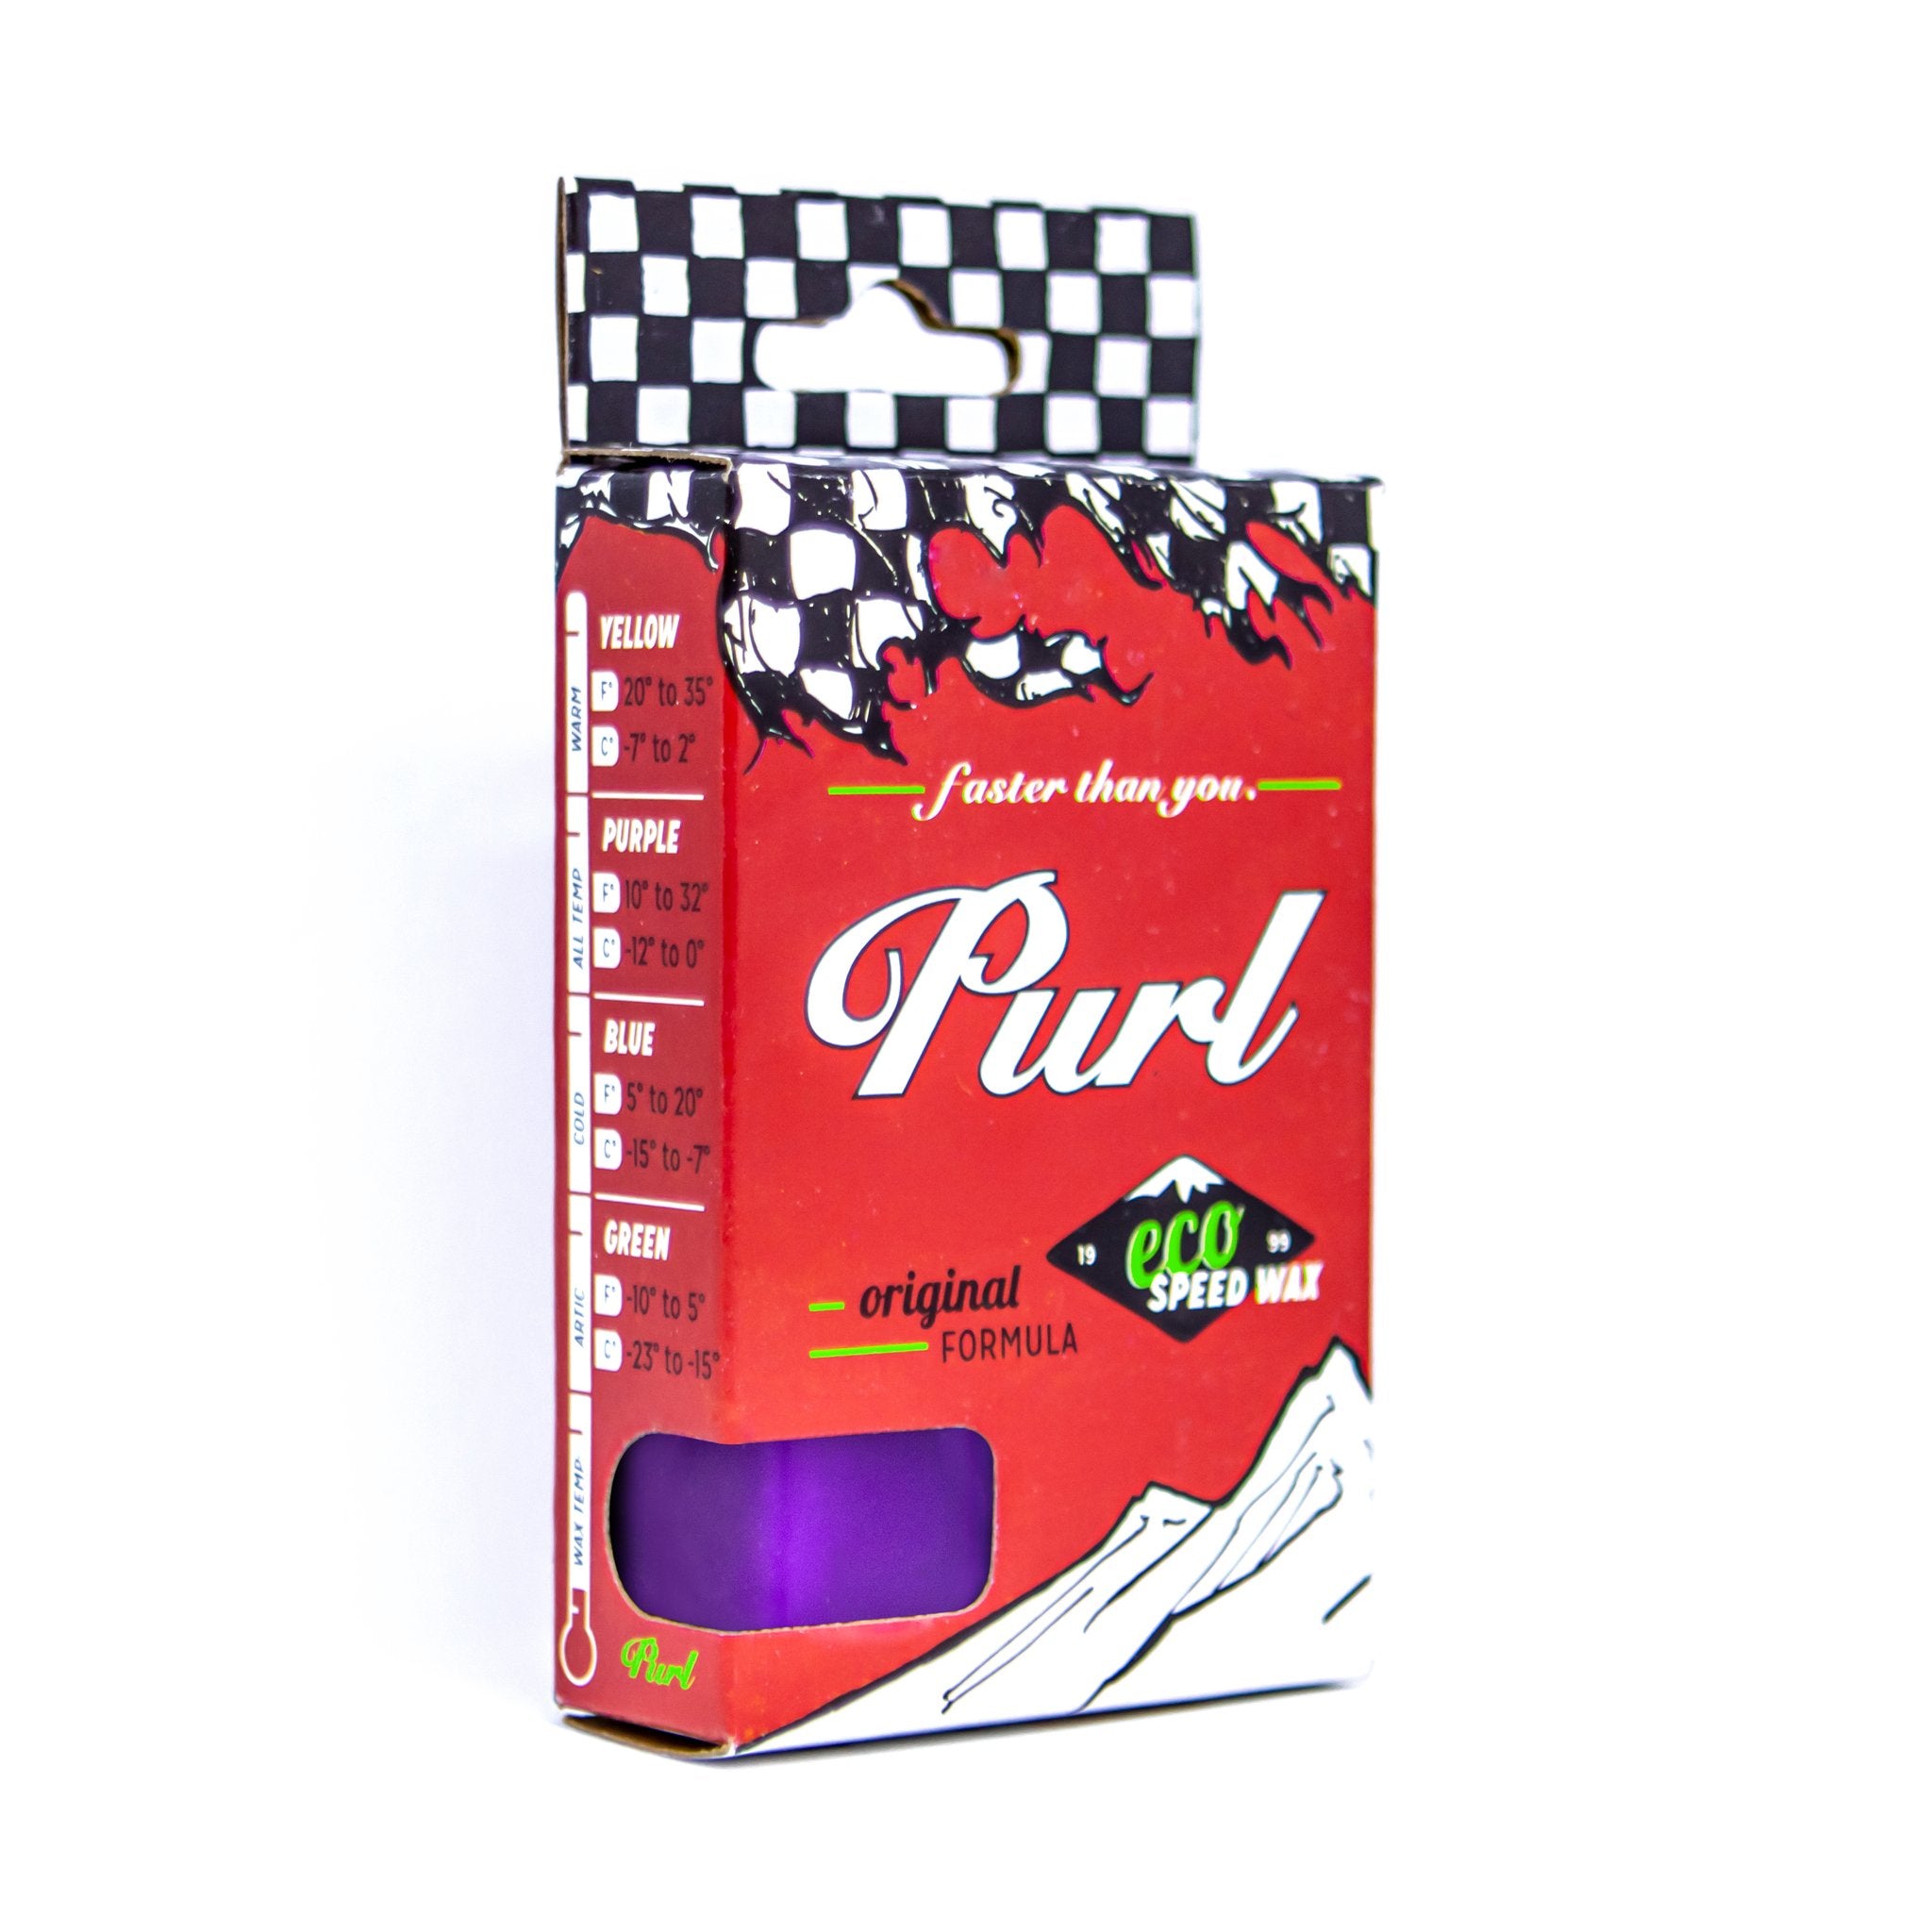 Purl Wax Purple All-Temperature Ski and Snowboard Wax Bar, ideal for optimizing speed and performance